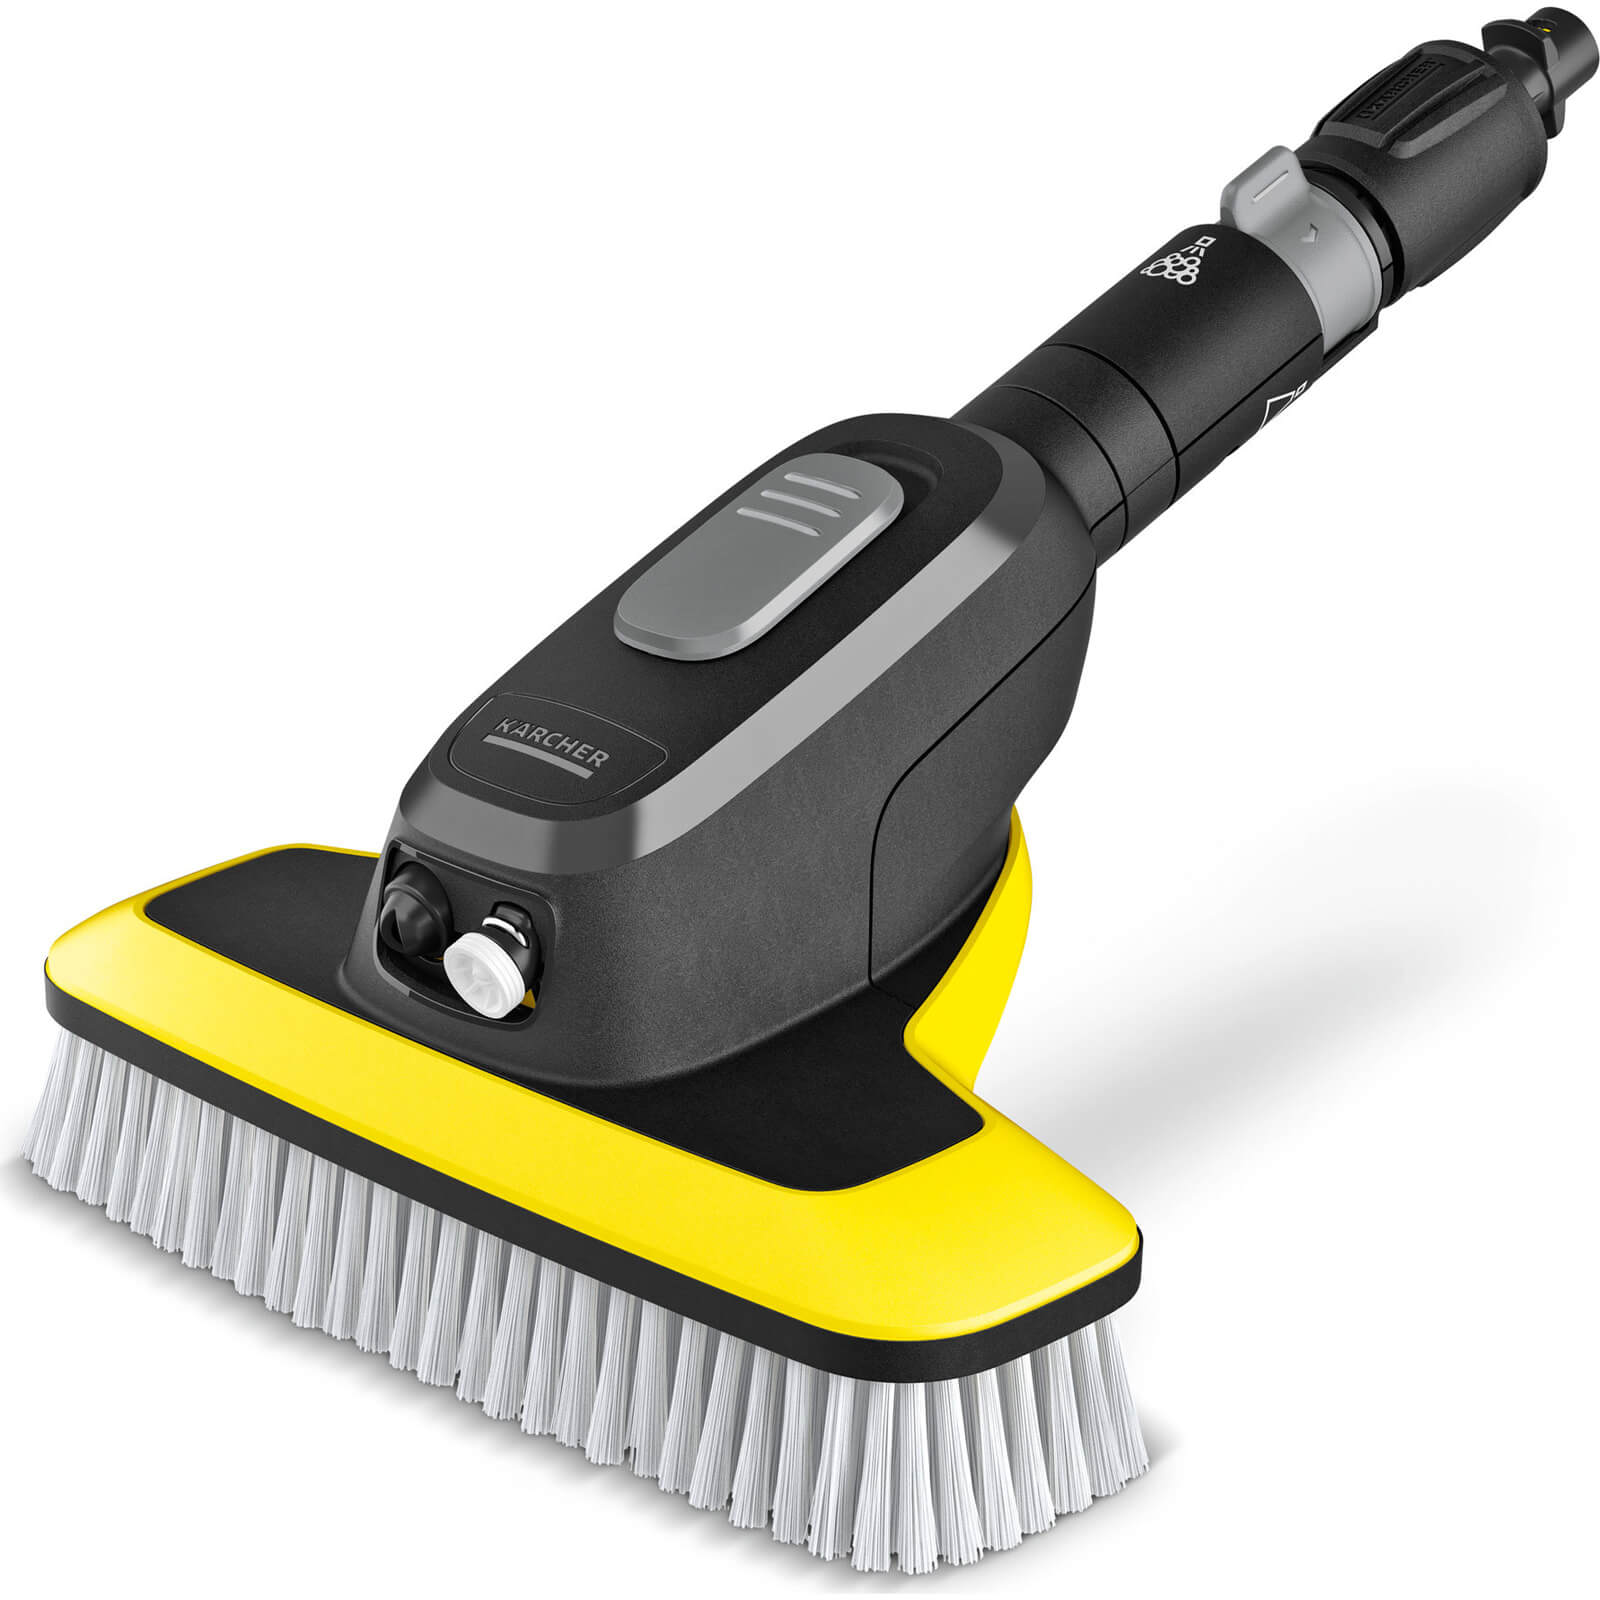 Karcher WB 7 Plus 3 in 1 Wash Brush for K Pressure Washers